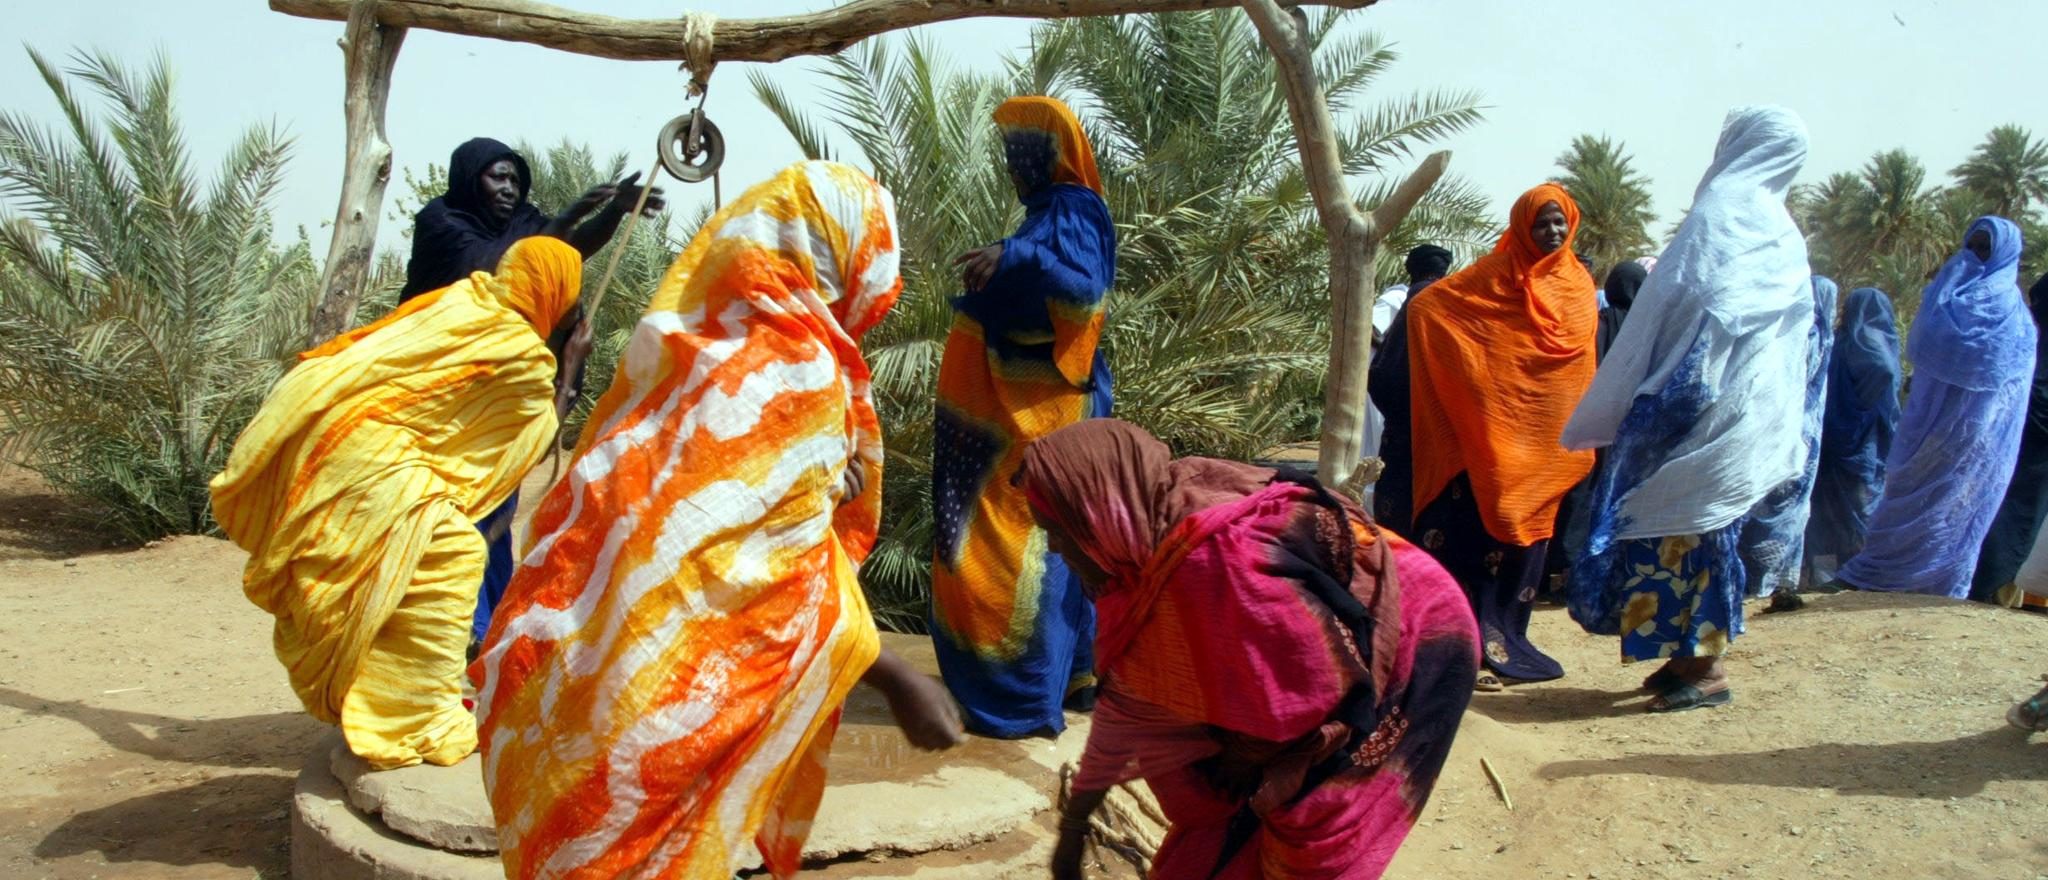 BARKEOL, MAURITANIA: Mauritanian women fetch water 08 June 2002 in the village of Barkeol, some 900 kms from the capital Nouakchott, in a garden in the middle of the desert. "The entire country is menaced by advancing sands, which destroy fertile lands," according to Mauritanian Minister of Rural Development and Environment Moustapha Ould Maoulou, who added that "poverty in Mauritania is synonymous with desertification because the majority of those living in abject poverty in our country are former nomads who have lost everything with the sand and drought." The head of the UN Food and Agriculture Organization (FAO), Jacques Diouf of Senegal, said 10 June 2002 that famines caused by drought, flooding and wars stir up world emotions while chronic hunger affecting more than 800 million people "only meets indifference." AFP PHOTO GEORES GOBET (Photo credit should read GEORGES GOBET/AFP via Getty Images)